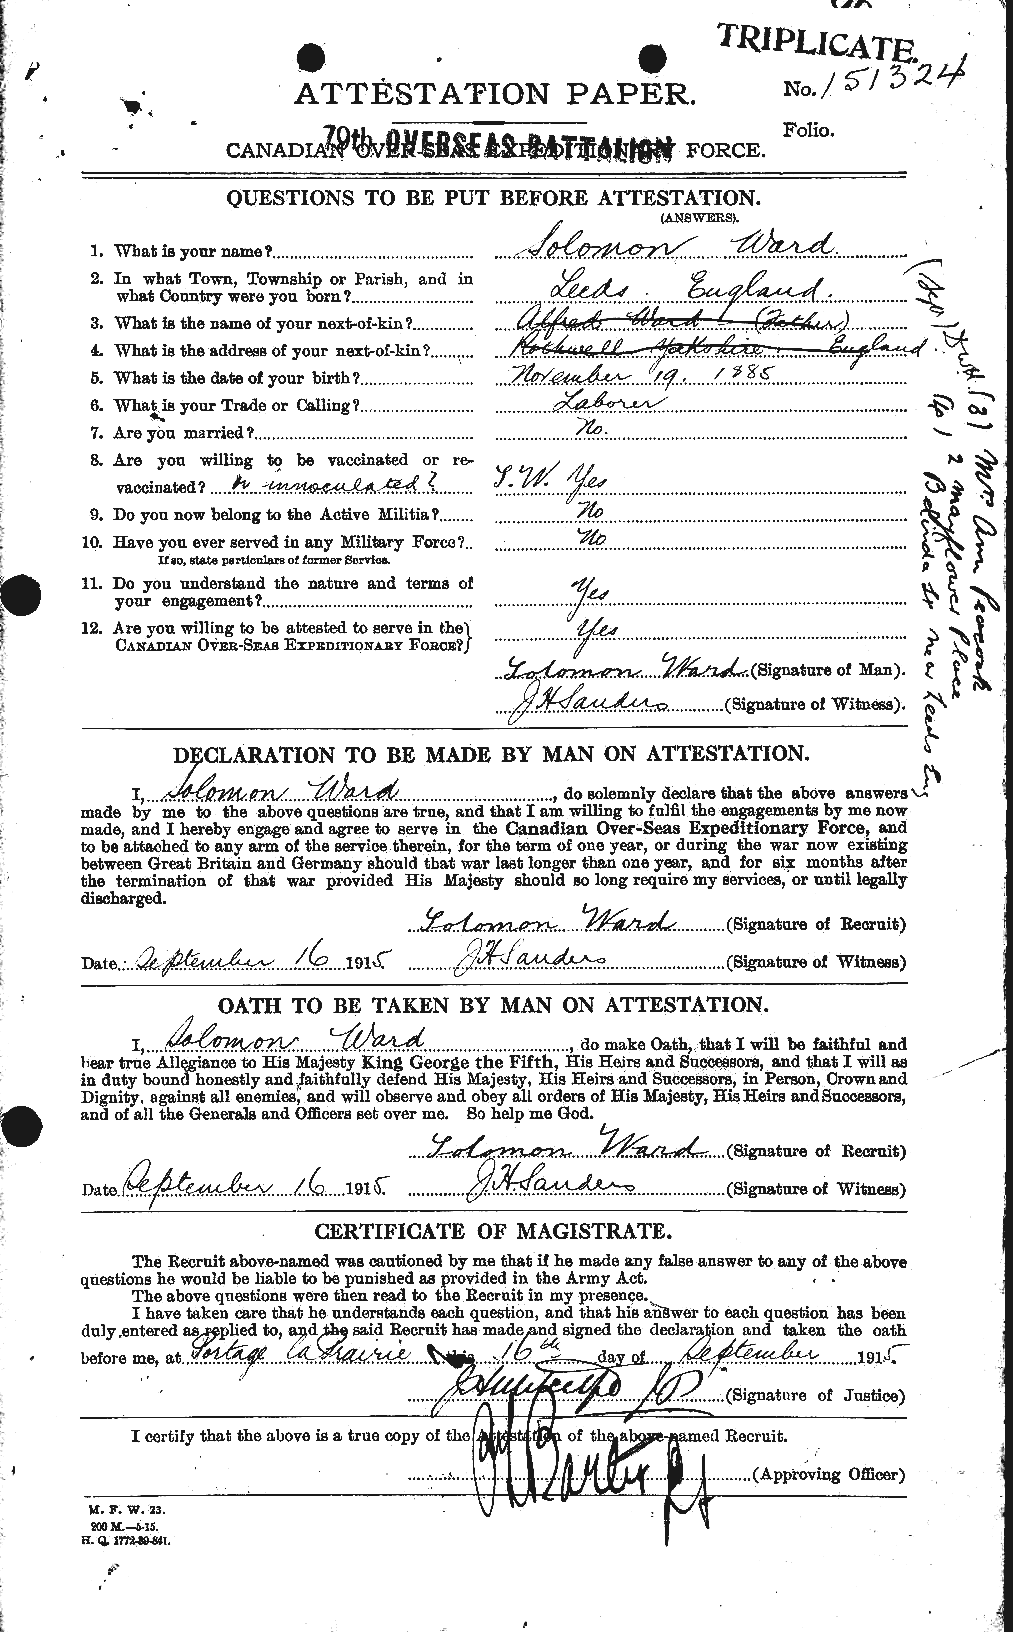 Personnel Records of the First World War - CEF 659691a